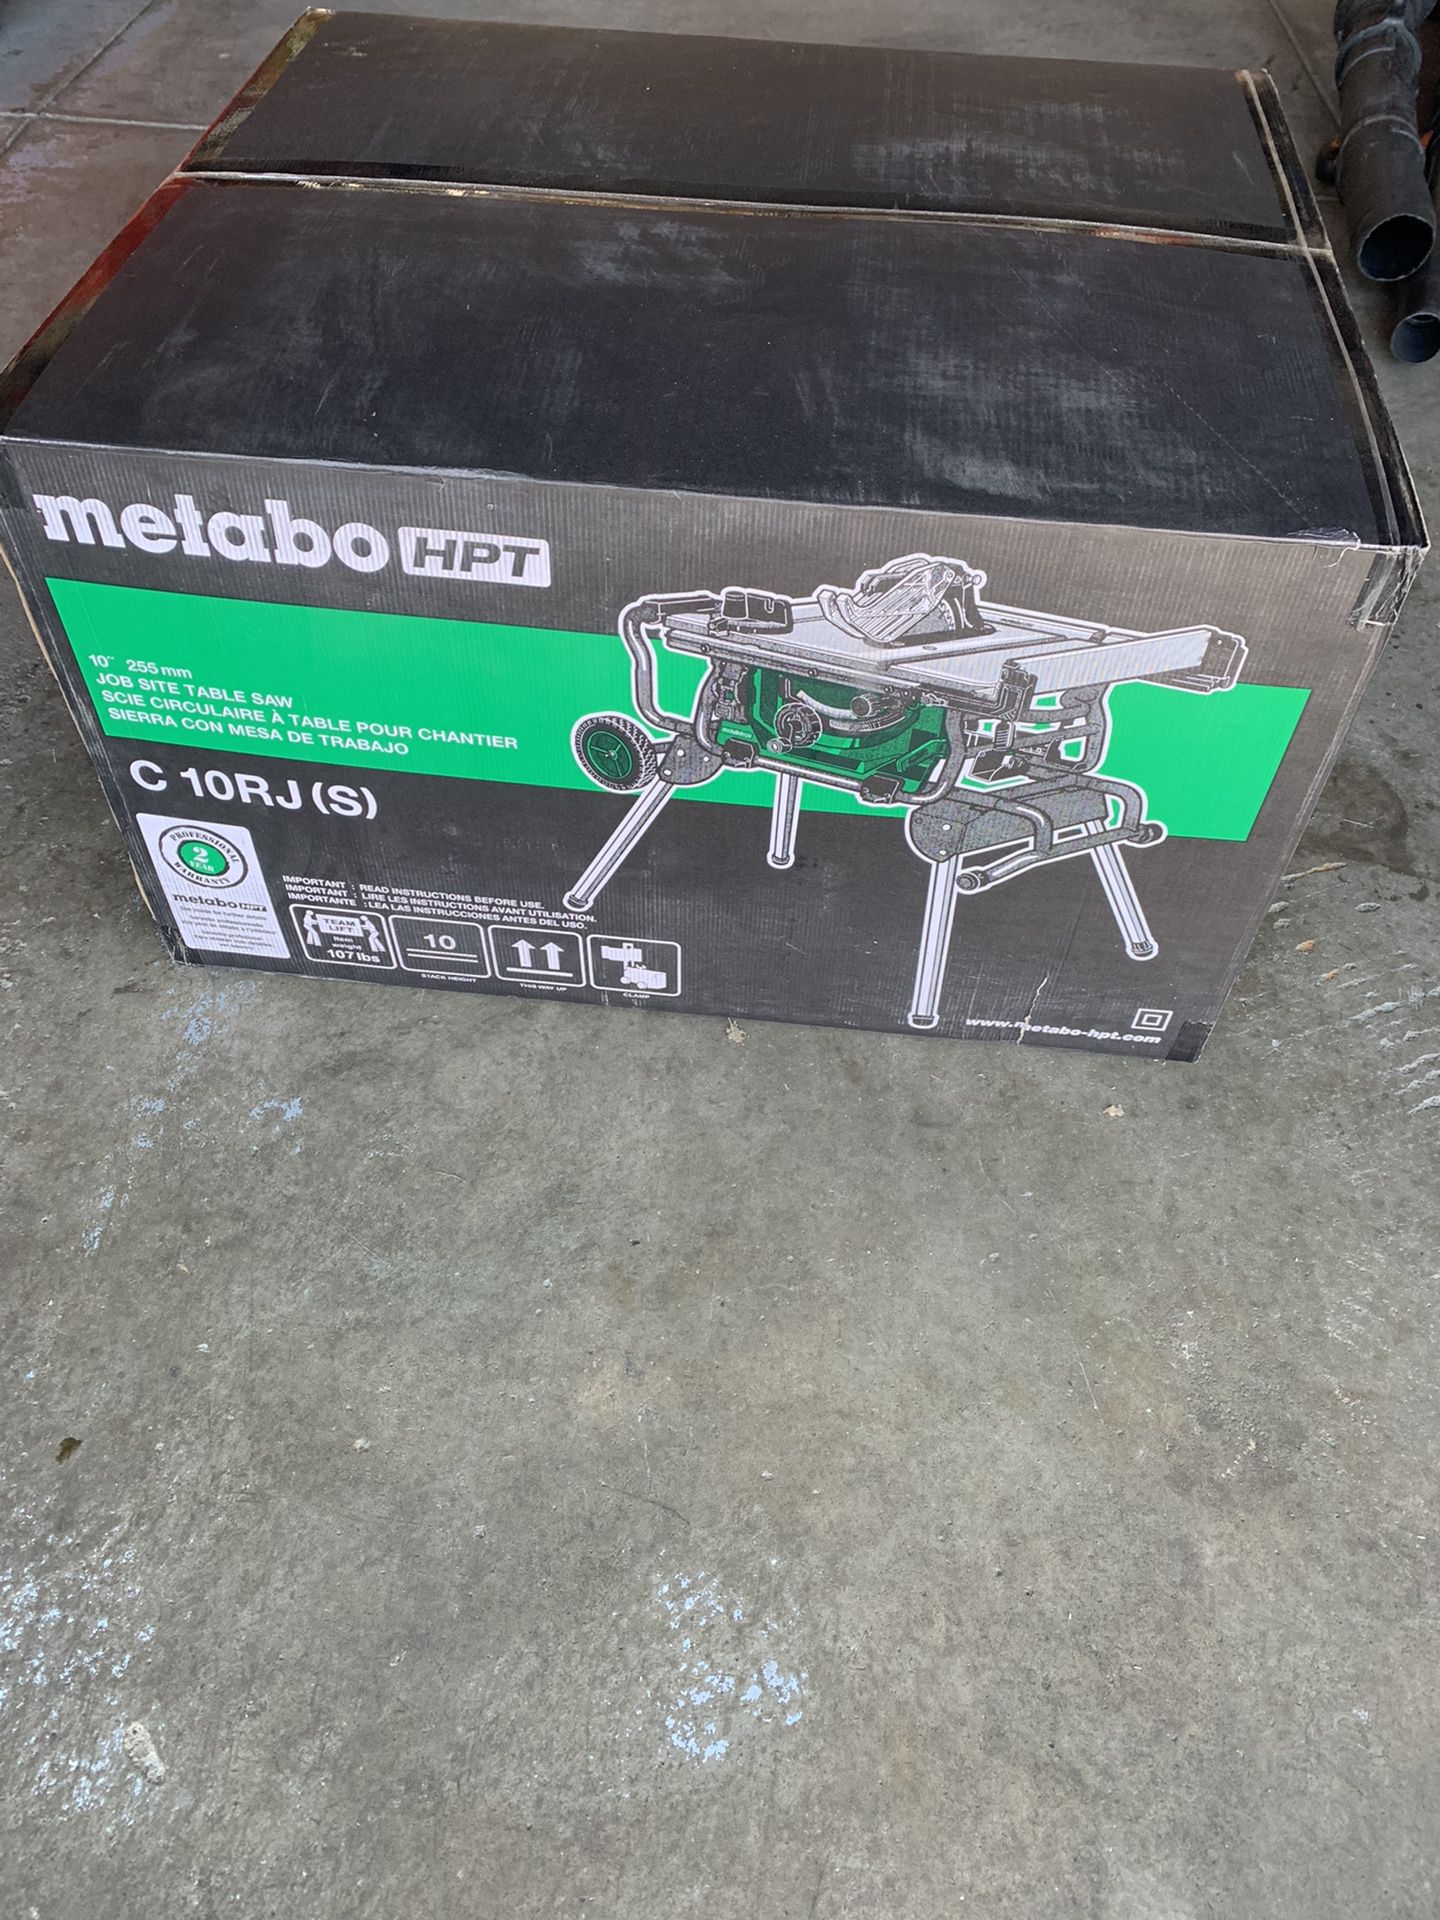 Metabo Hitachi Table Saw With Stand In Box